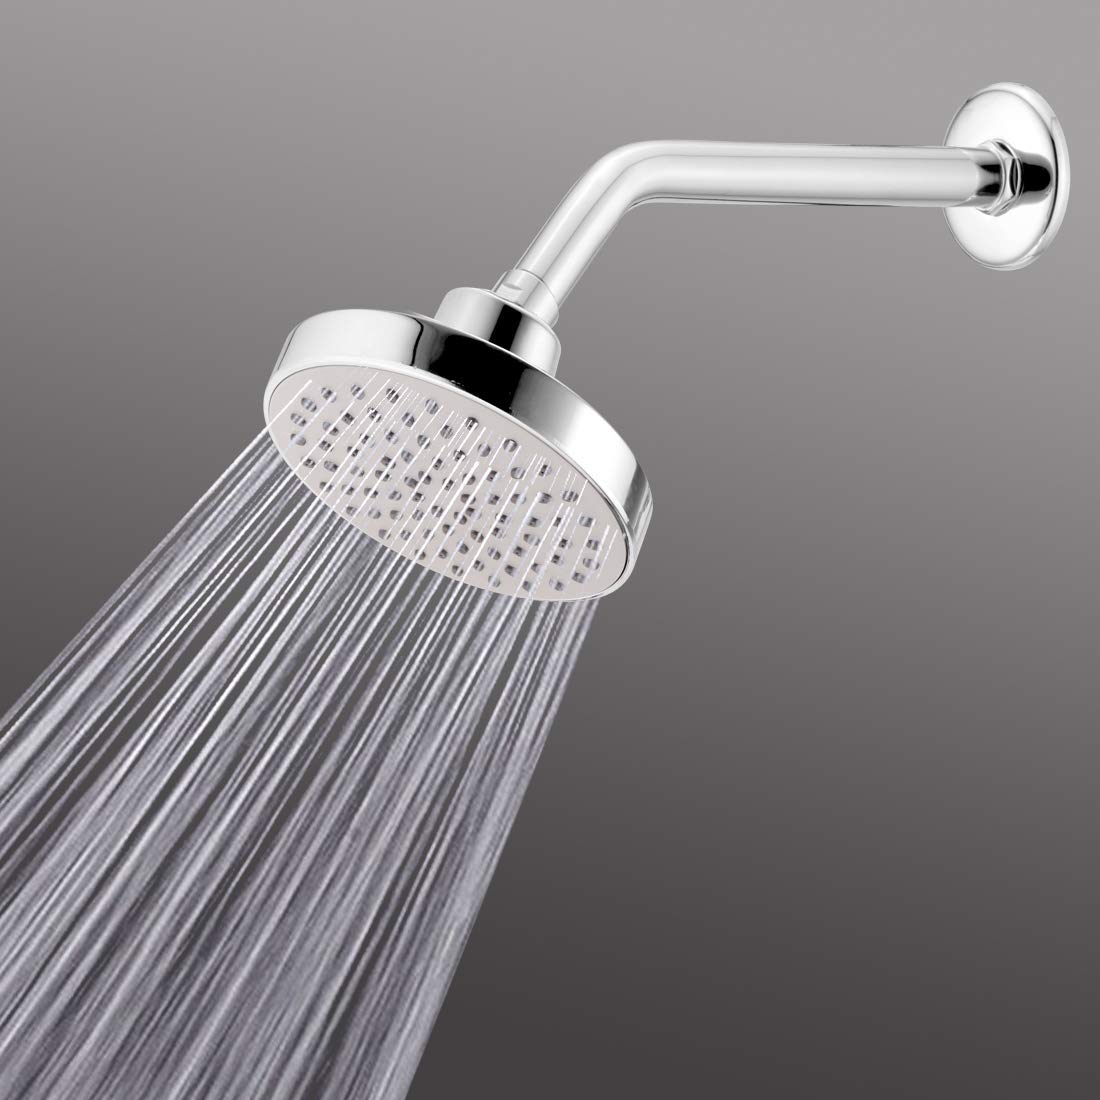 RiverSoft Overhead Shower Basic without arm (ABS, Chrome)